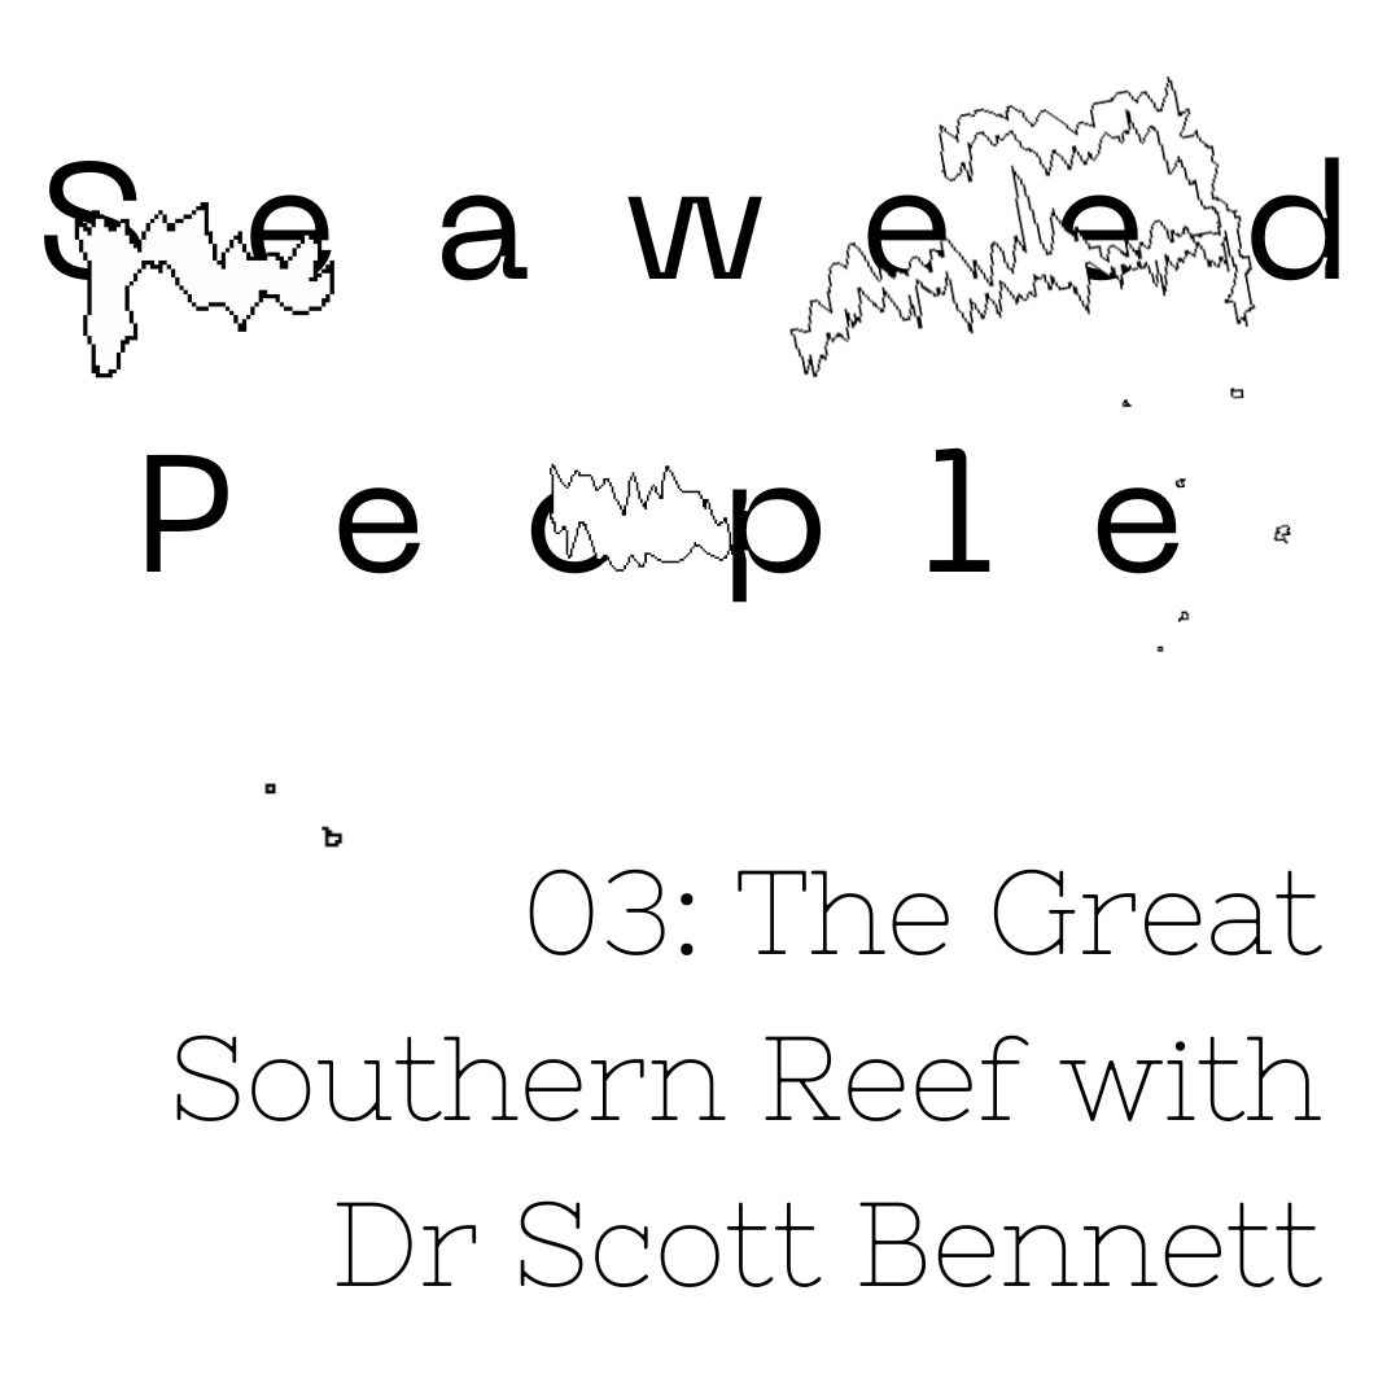 The Great Southern Reef with Dr Scott Bennett